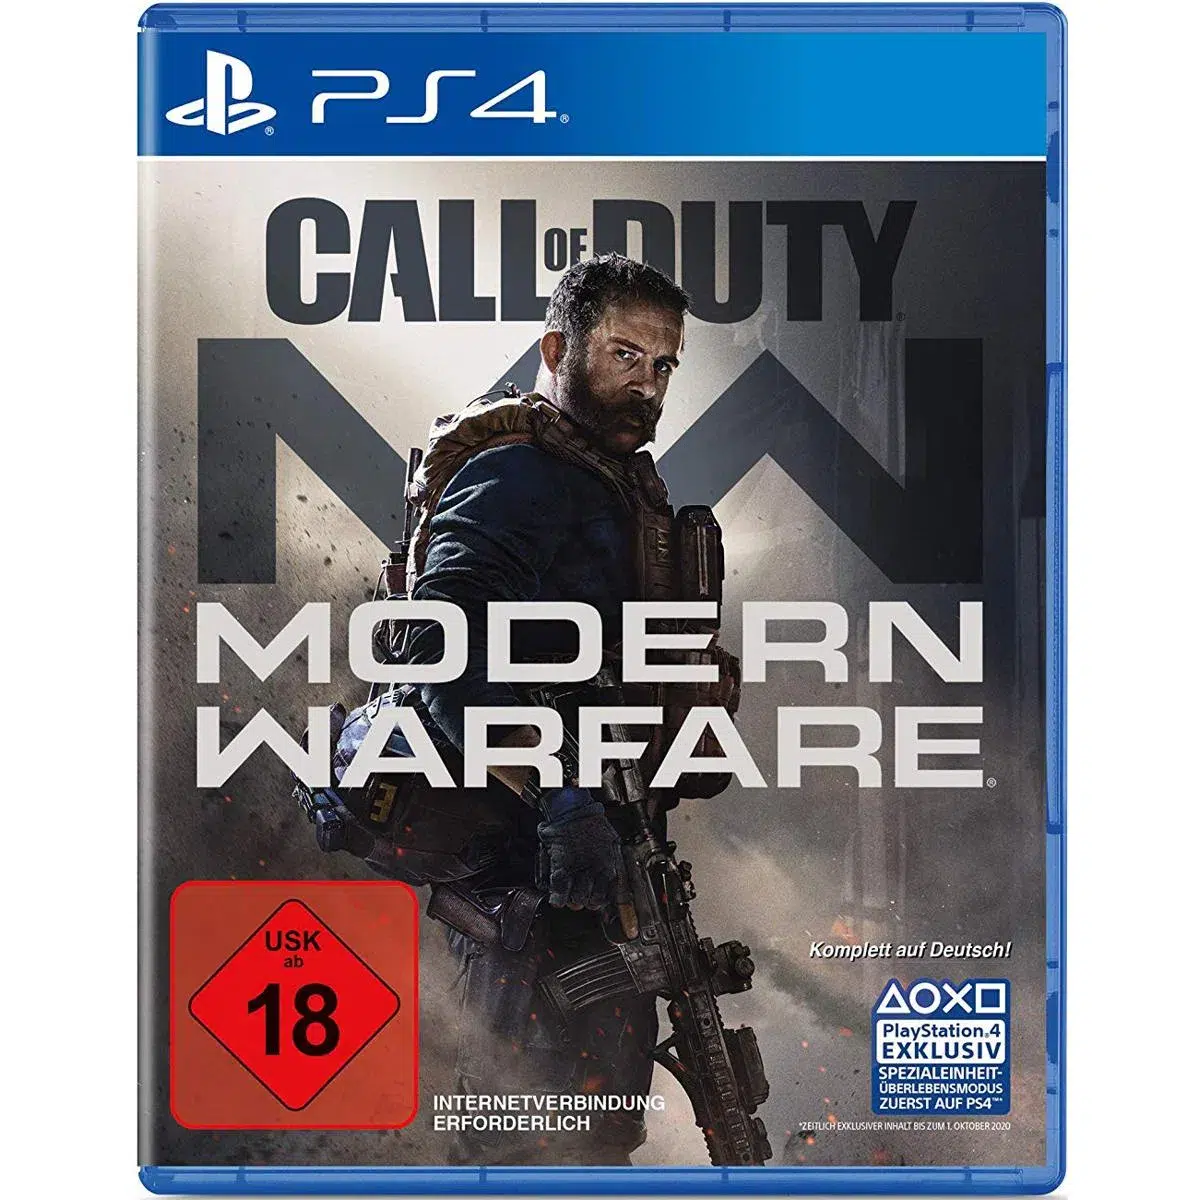 Call of Duty: Modern Warfare - Exclusive Edition (PS4)